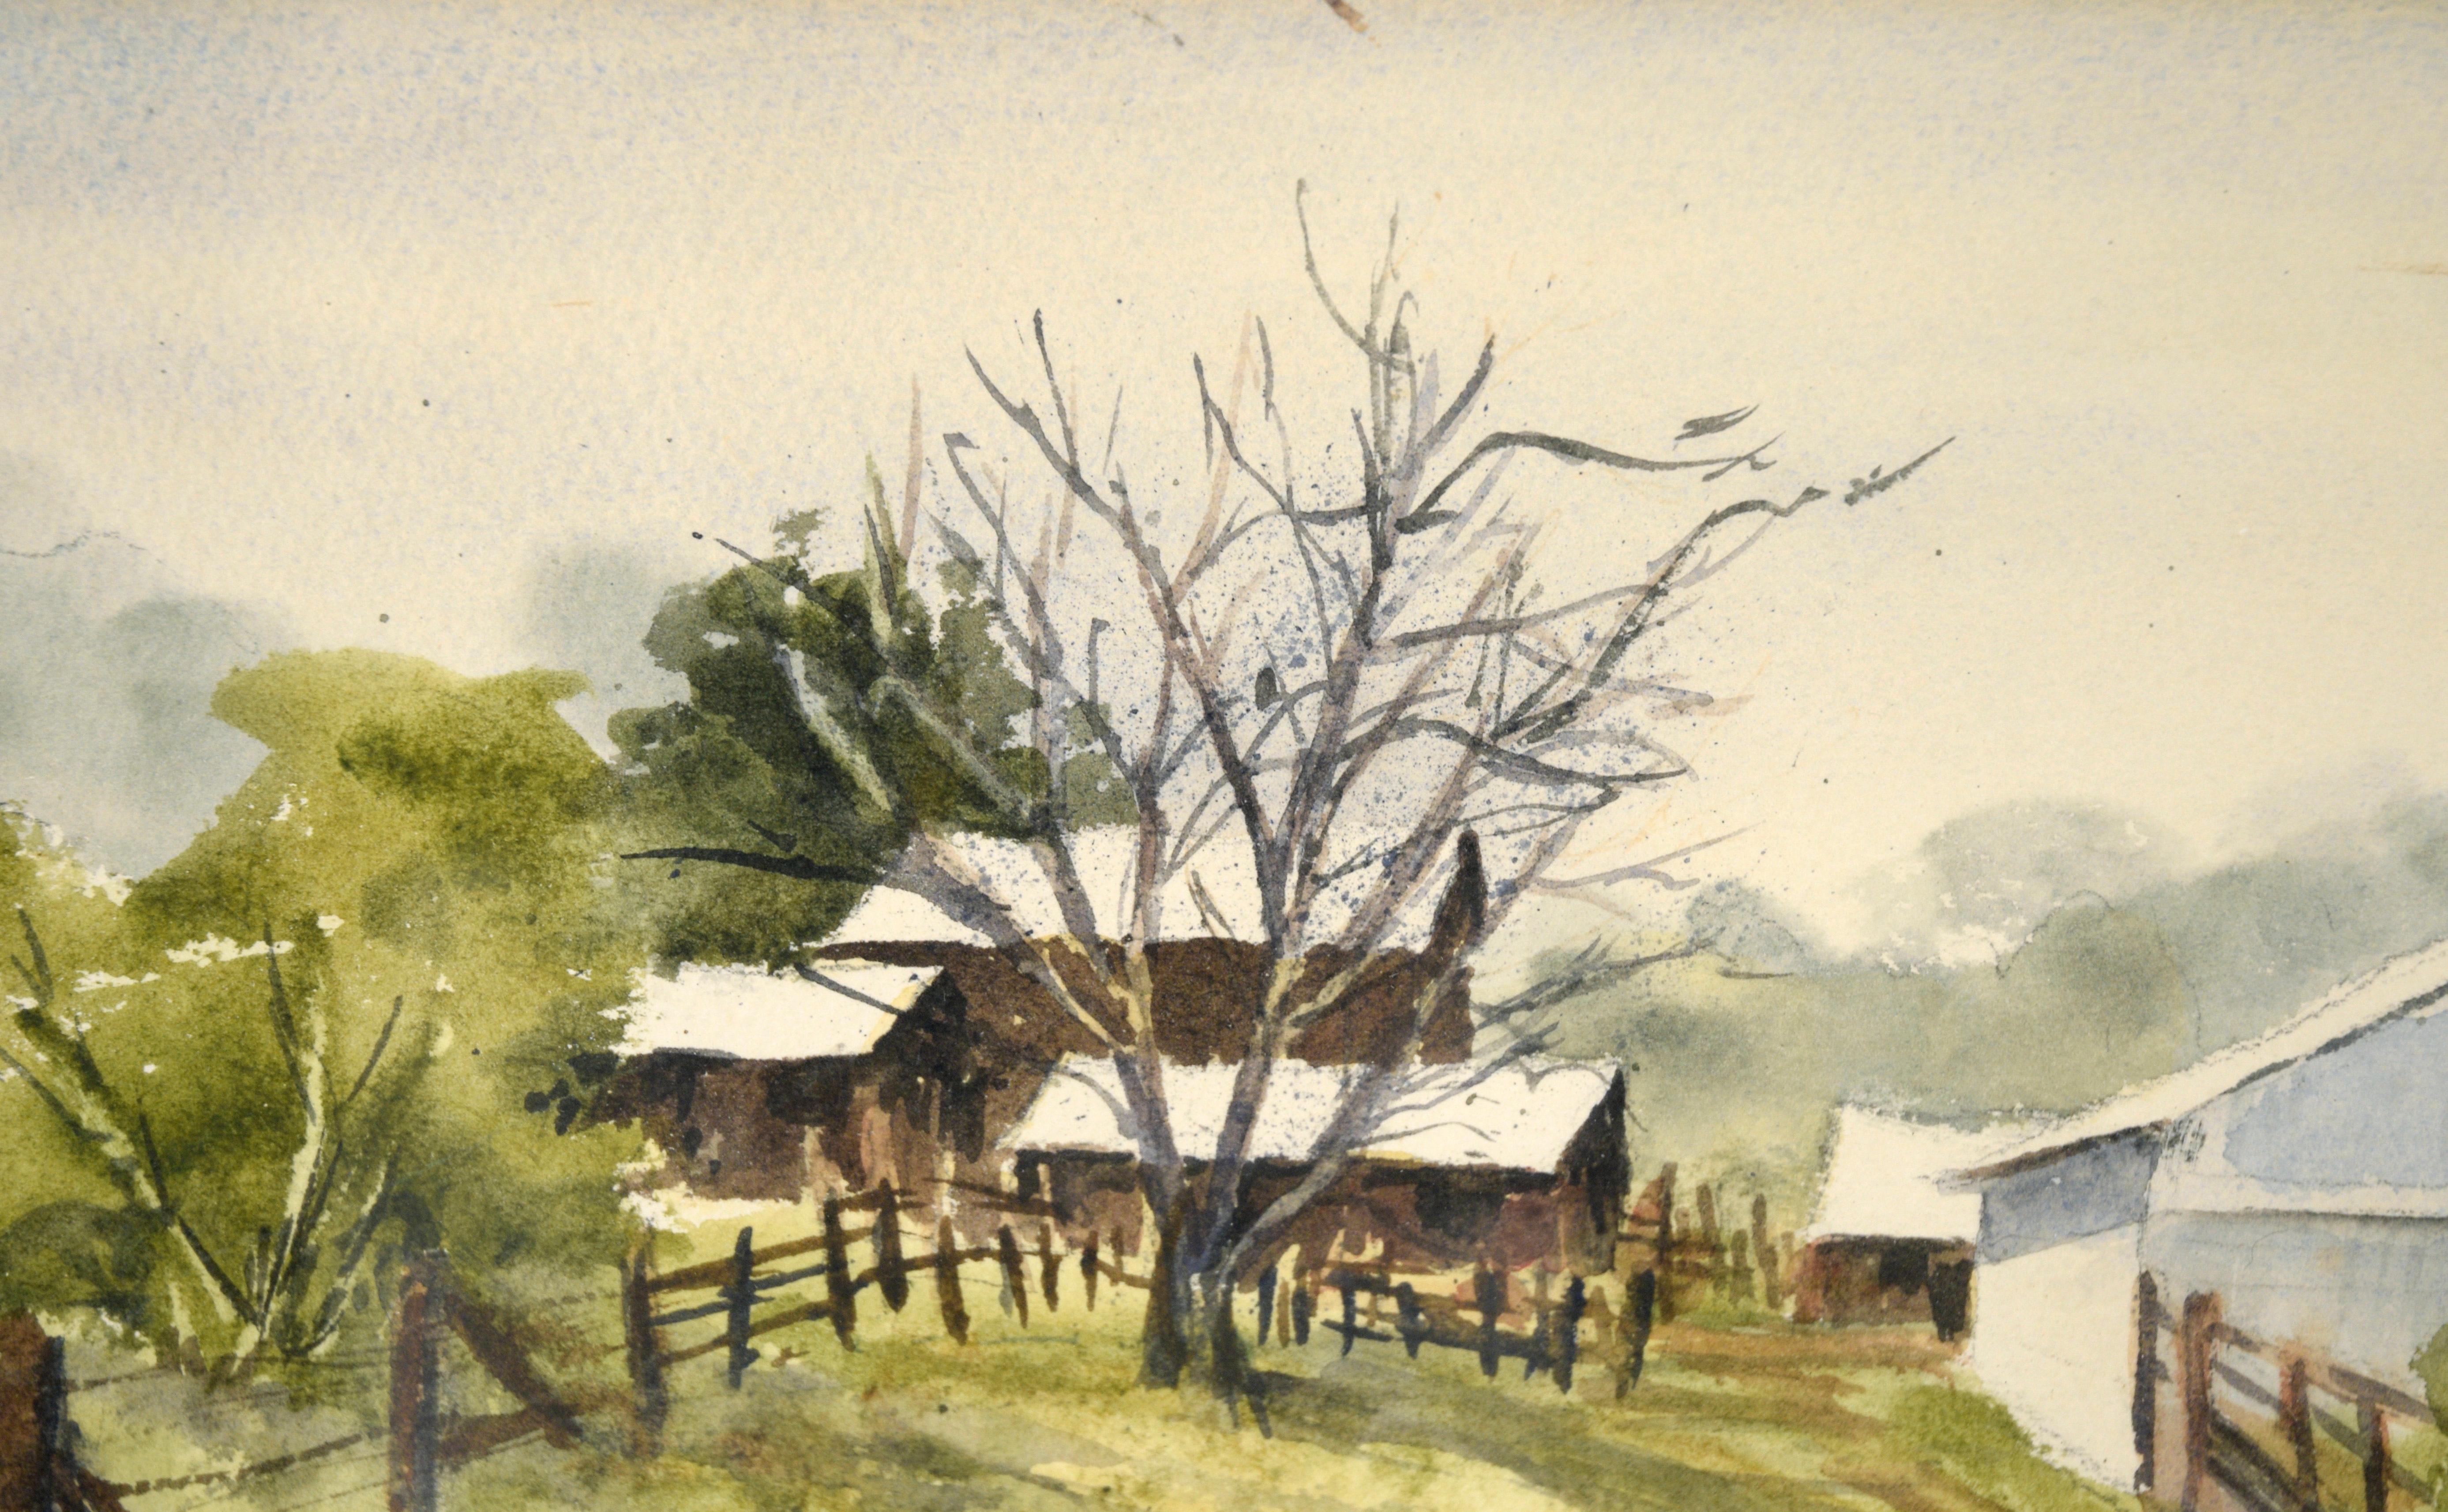 Grey Barn and Brown House - Rural California Landscape in Watercolor on Paper - American Impressionist Art by Alice Duke